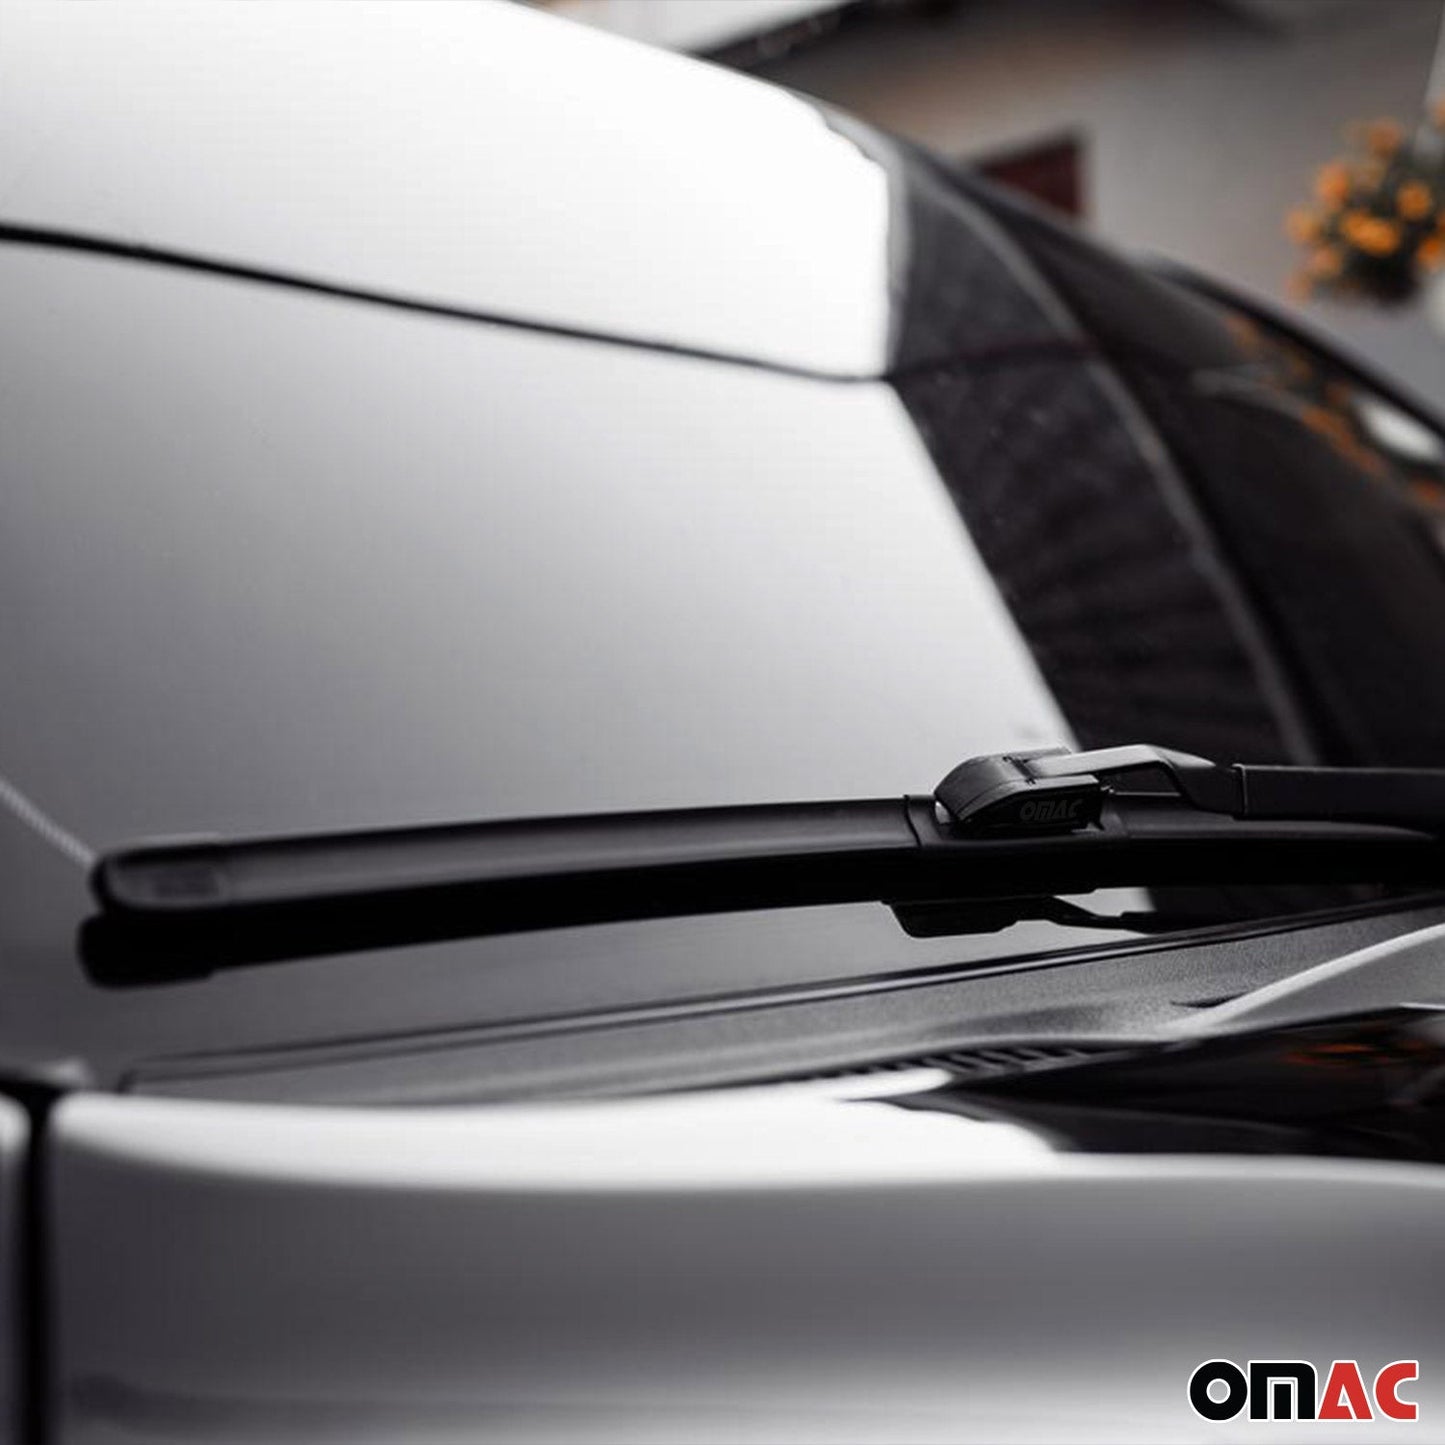 OMAC Front Windshield Wiper Blades Set for BMW X6 E71 2008-2014 A018510